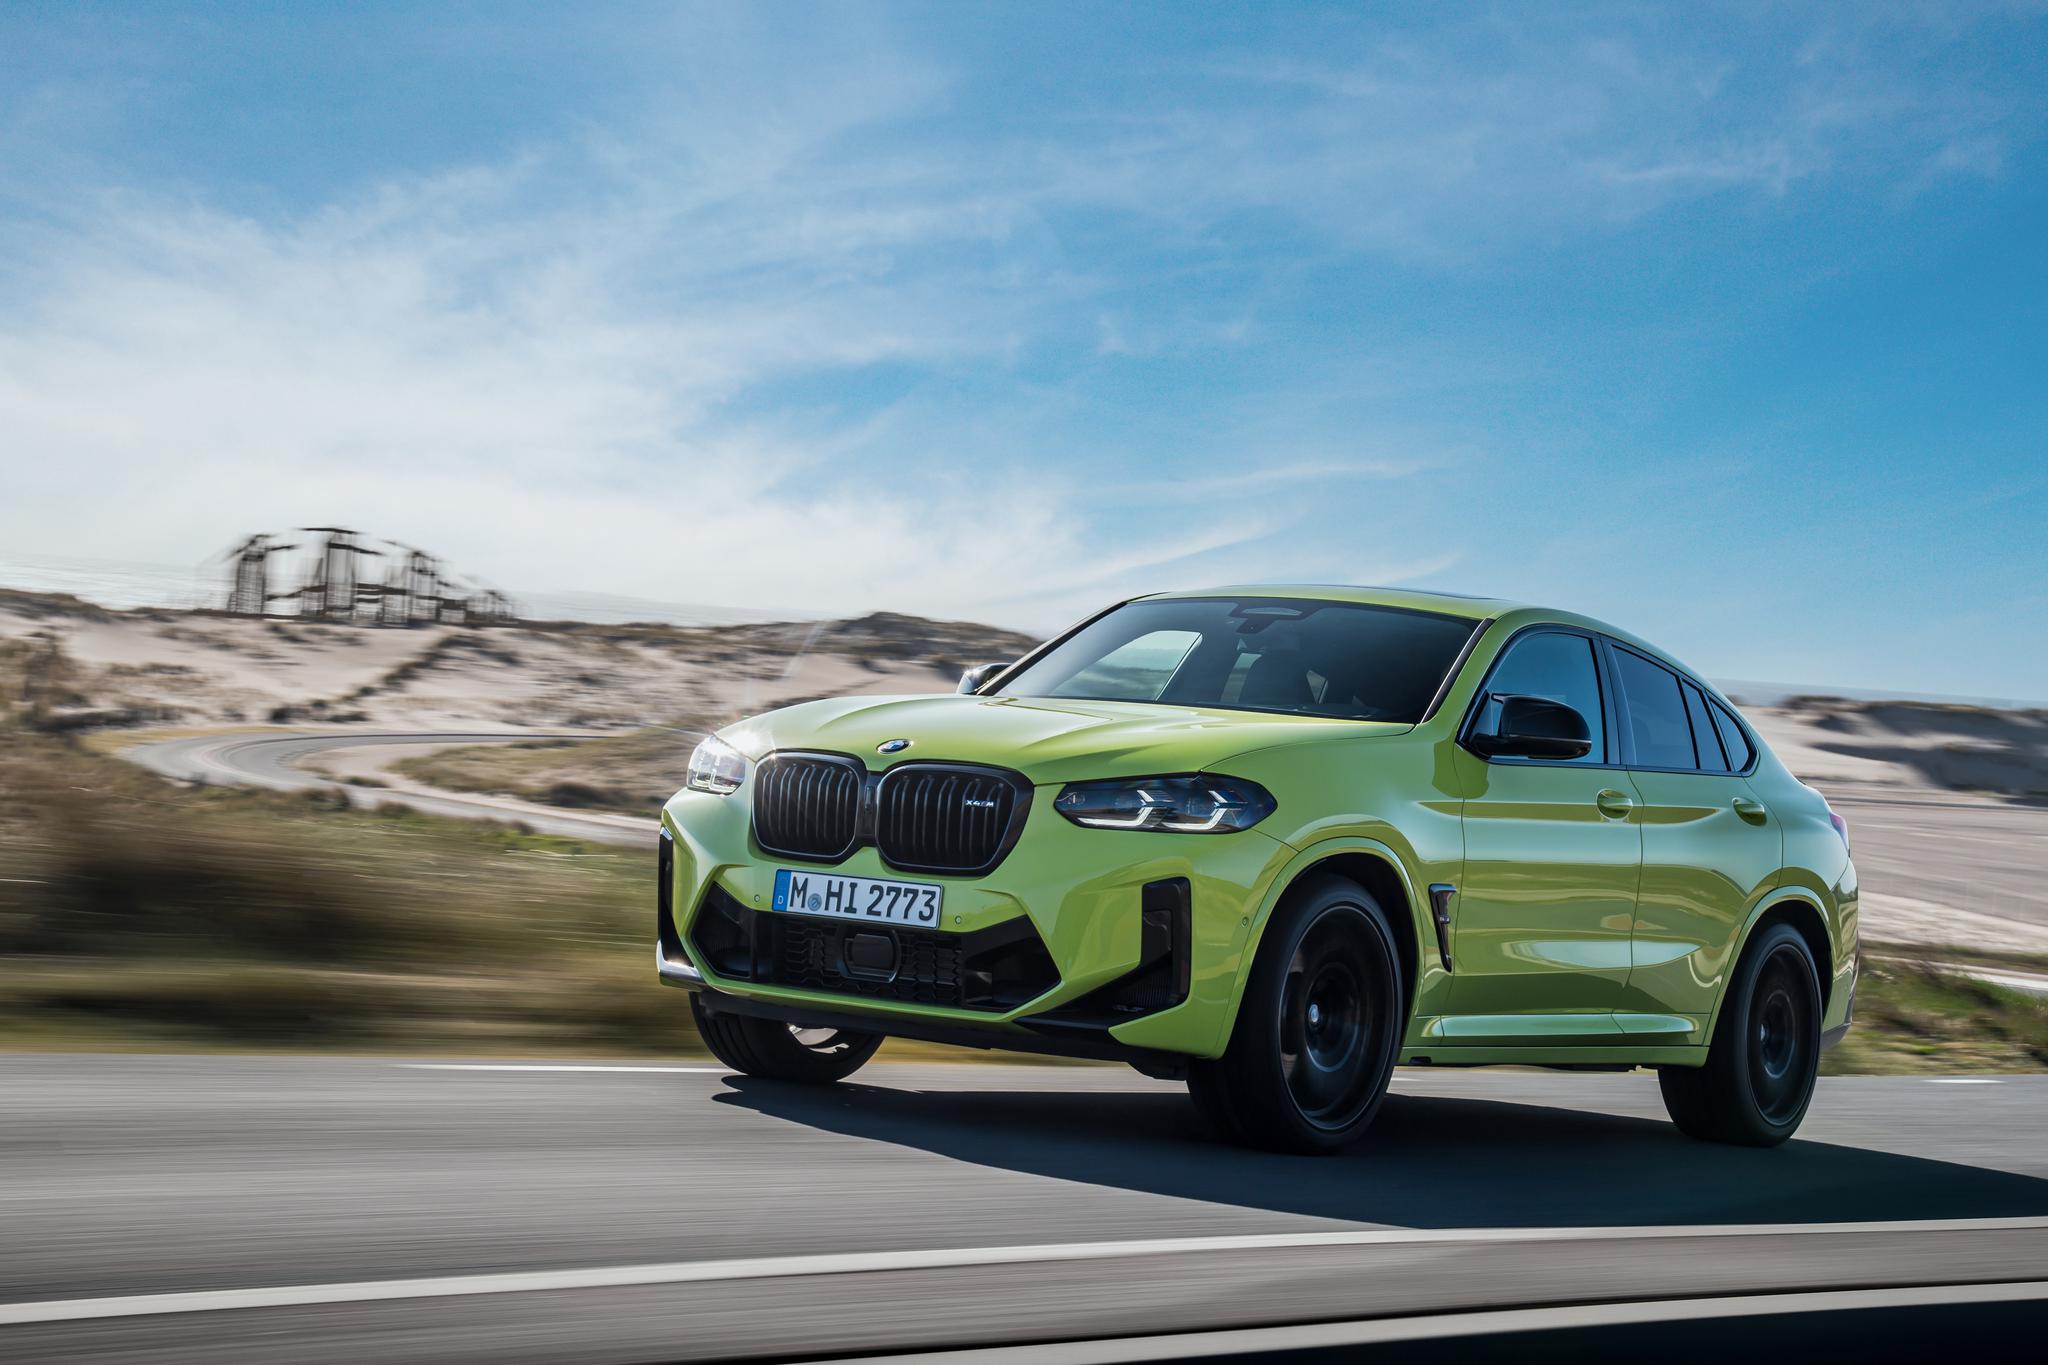 The face-lifted BMW X4 M Competition